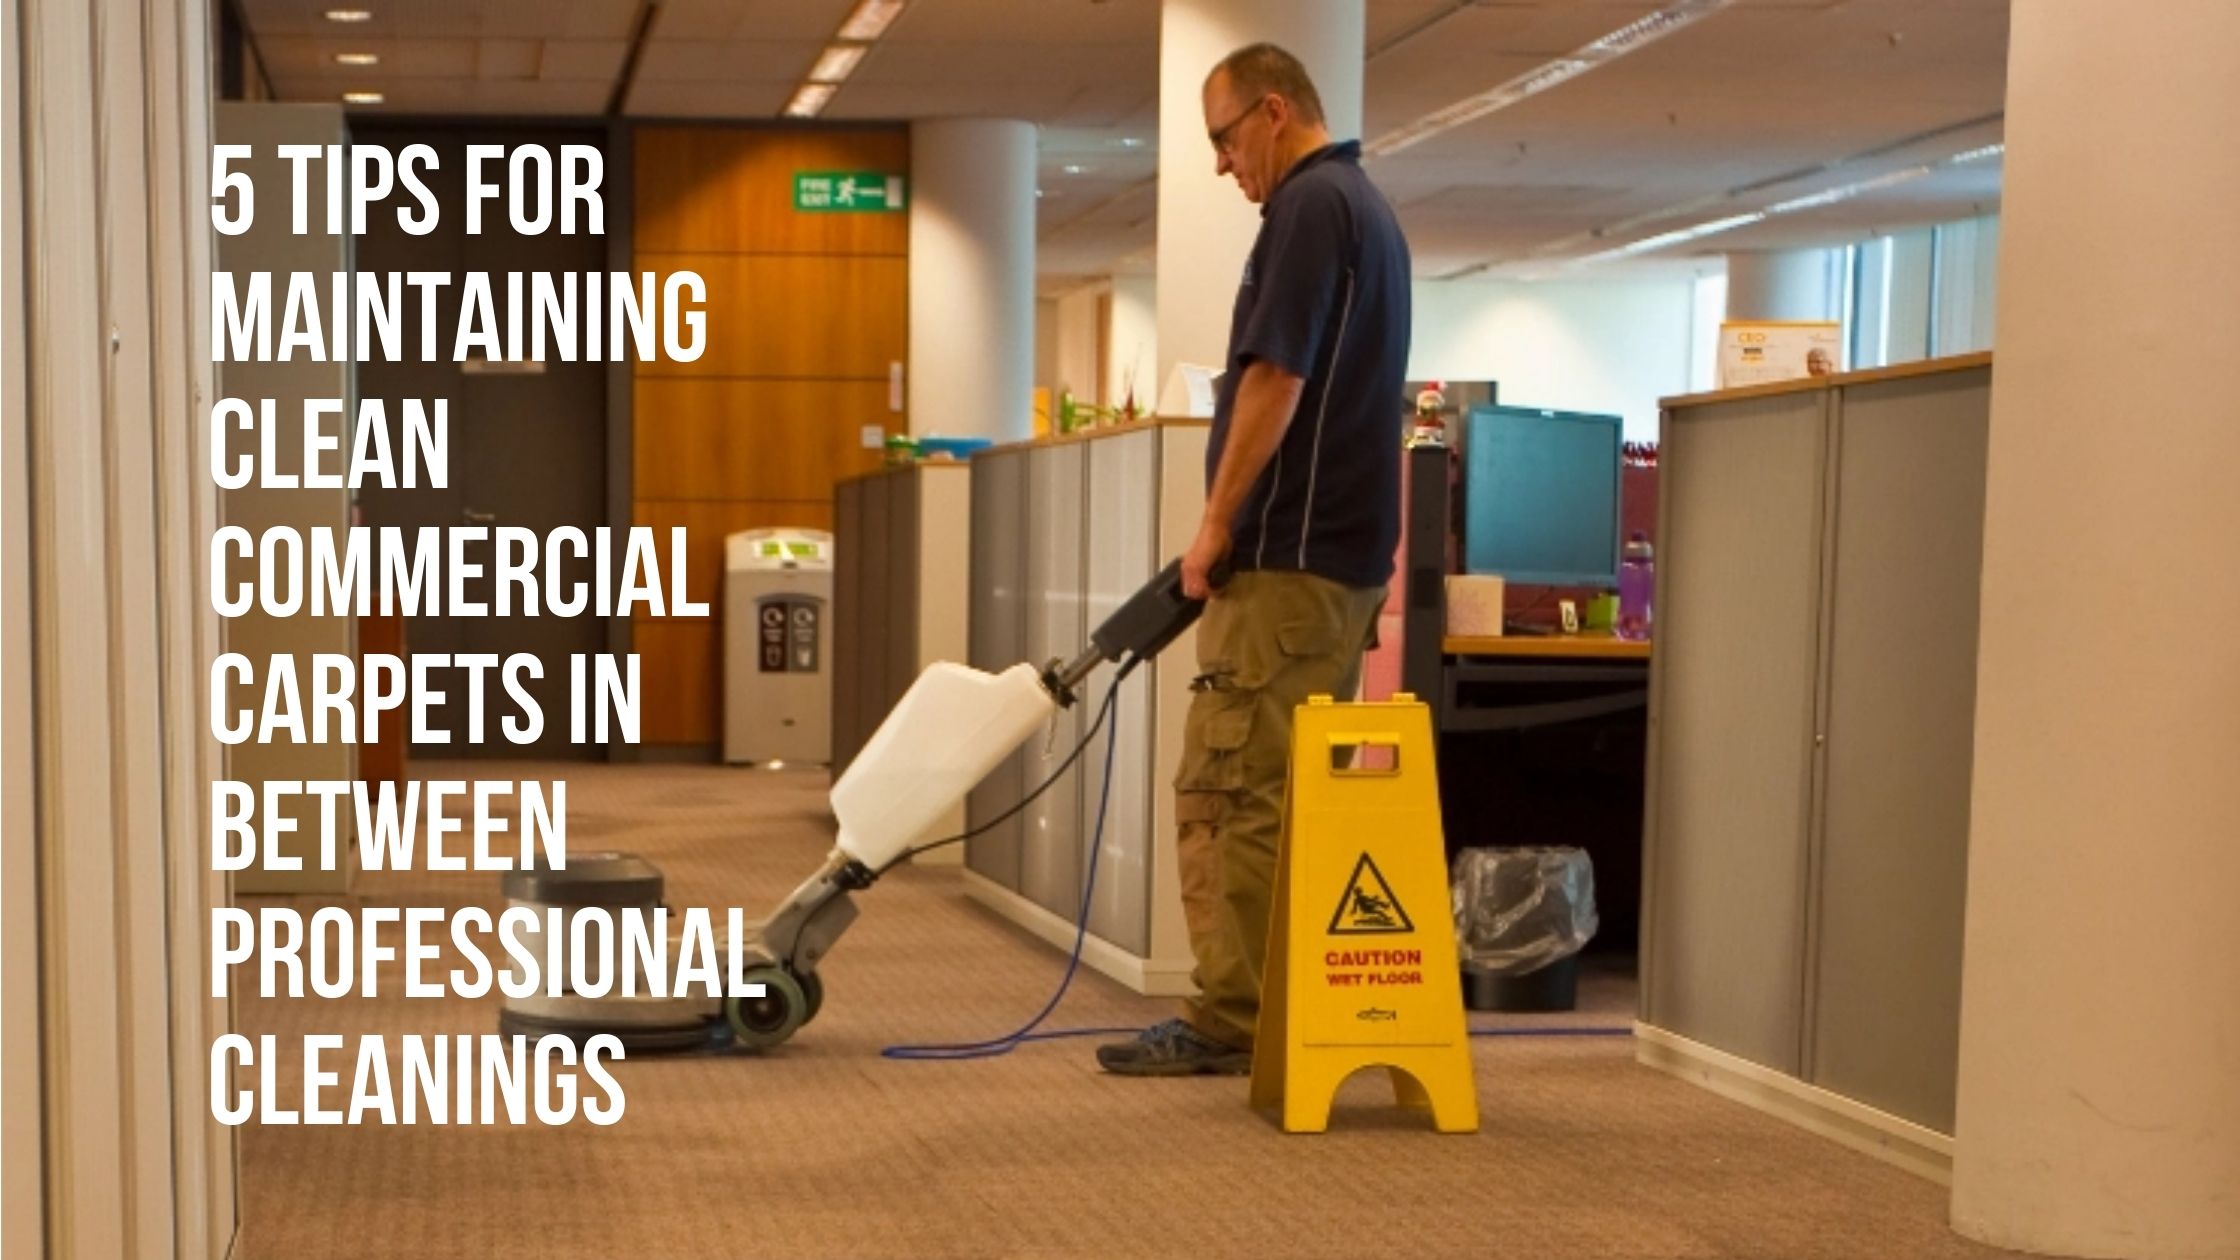 5 Tips For Maintaining Clean Commercial Carpets In Between Professional Cleanings